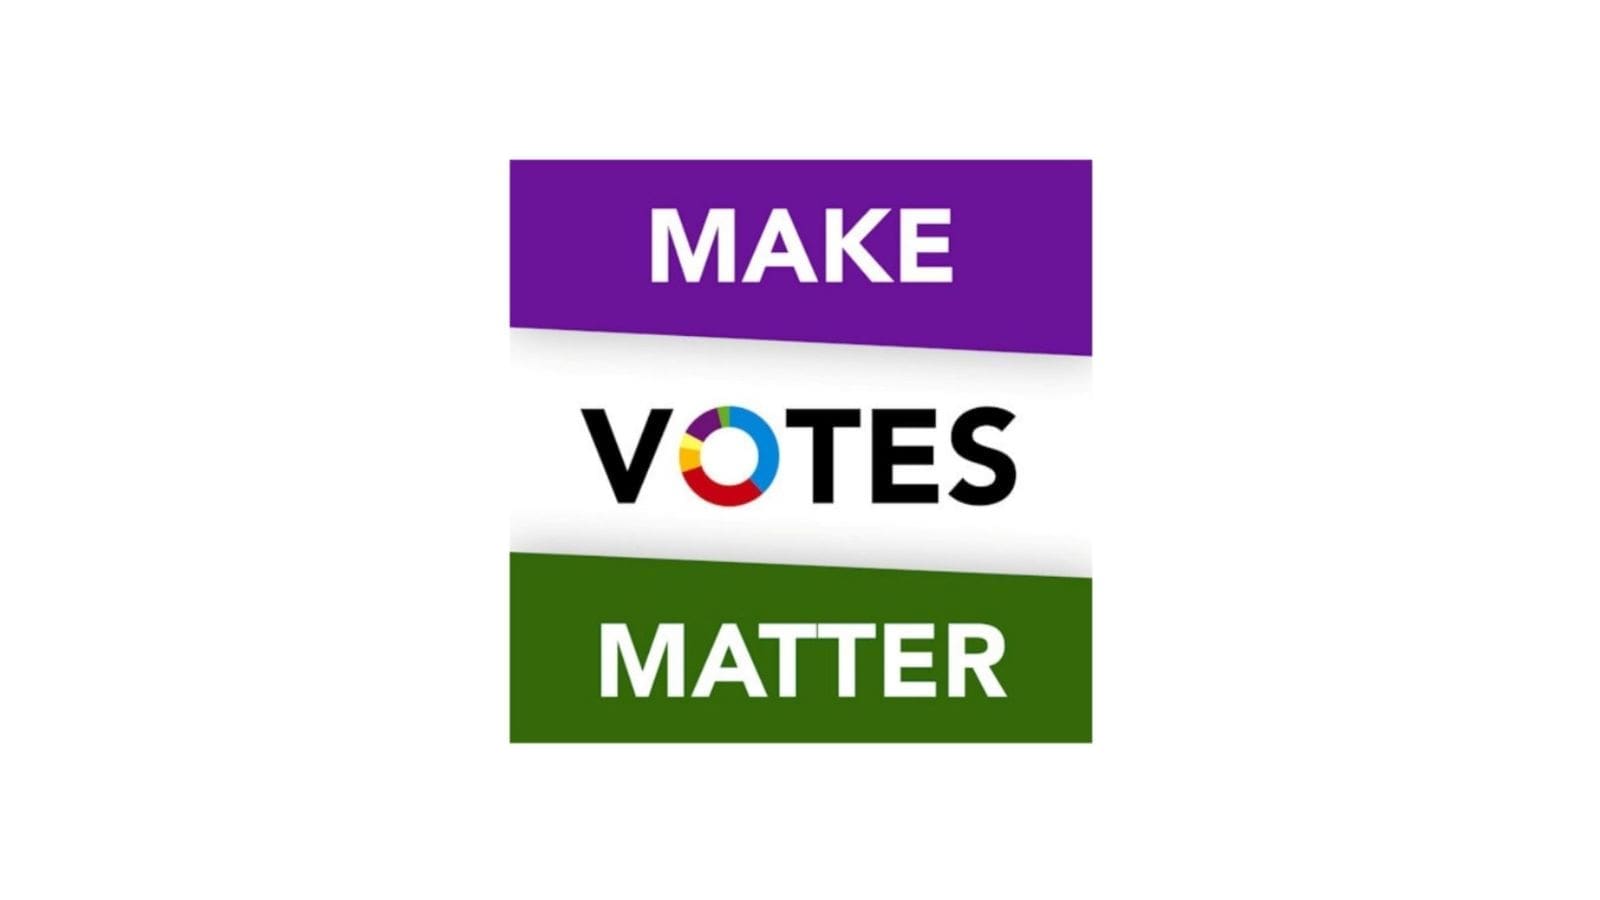 The words "Make Votes Matter" with the "O" being made out of a multi coloured pie chart. Each word is on a diffrent colour with "Make" on a purple background, "Votes" on a white background including a faded image of a crowd behind it and finally "Matter" on a green background.